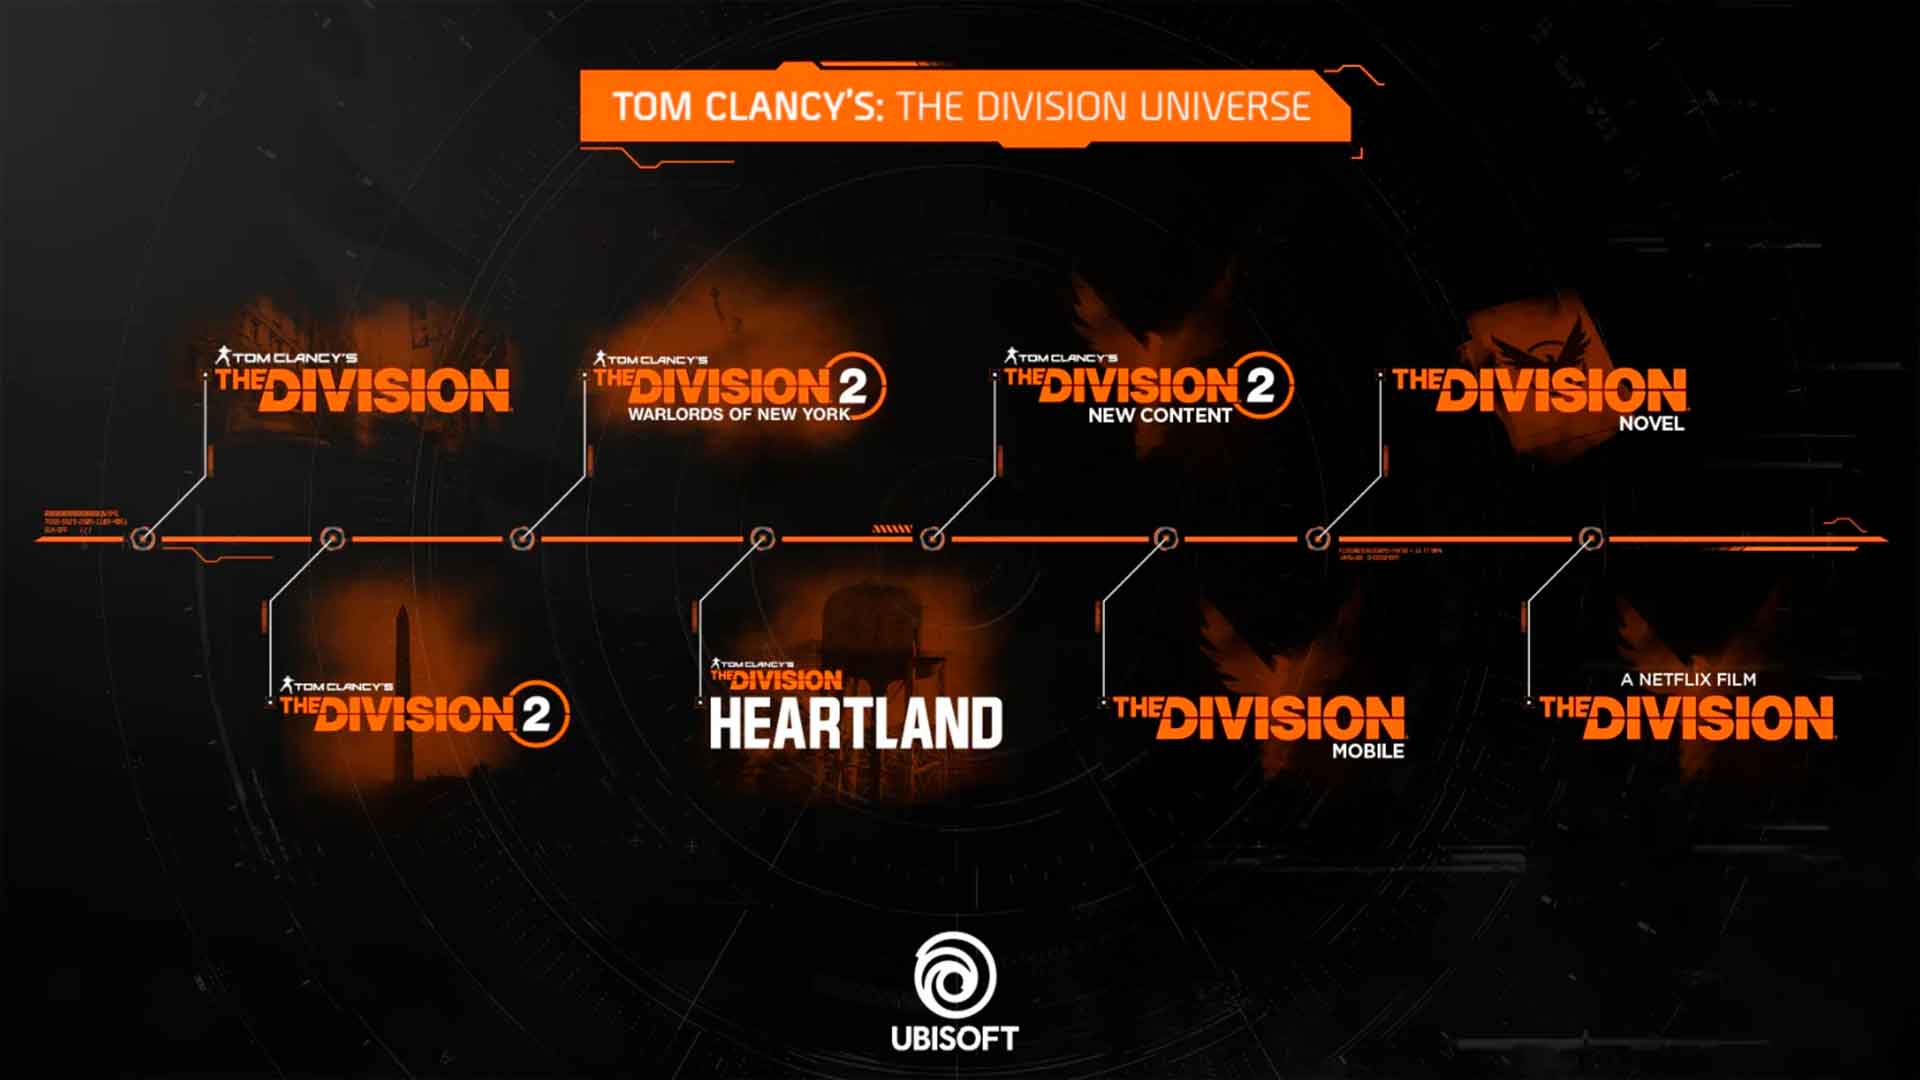 Tom Clancy's The Division heartland